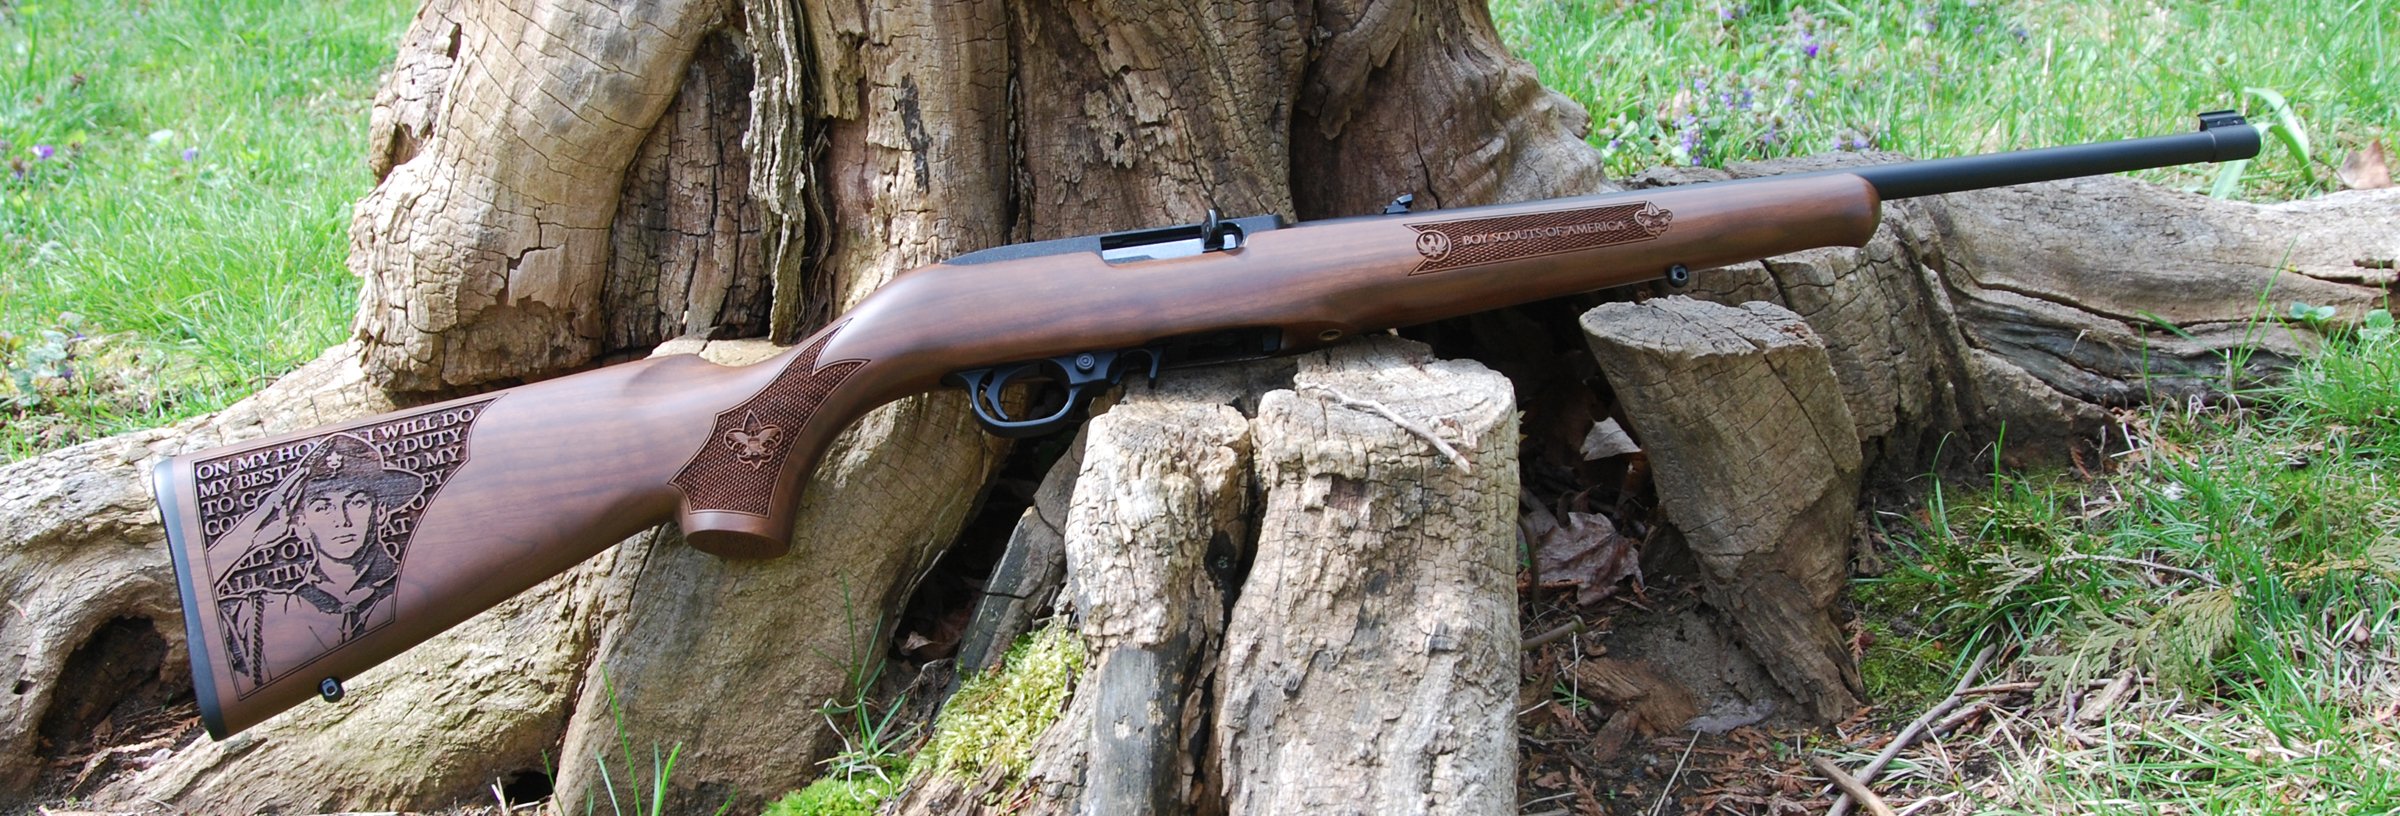 RUGER1022-BOYSCOUT-STOCK-2